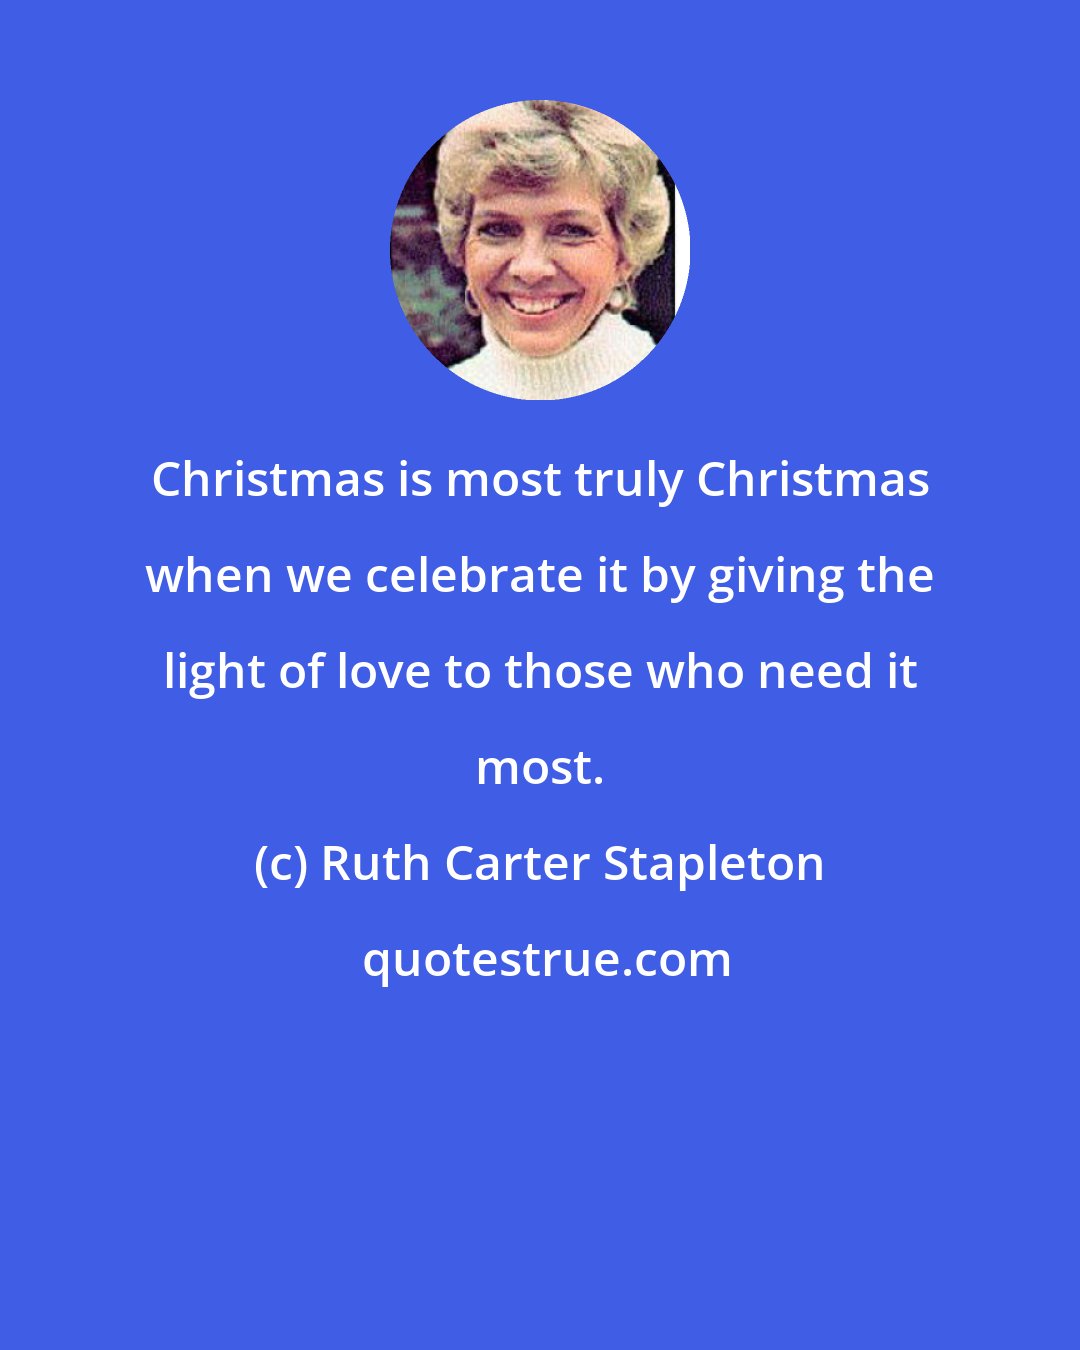 Ruth Carter Stapleton: Christmas is most truly Christmas when we celebrate it by giving the light of love to those who need it most.